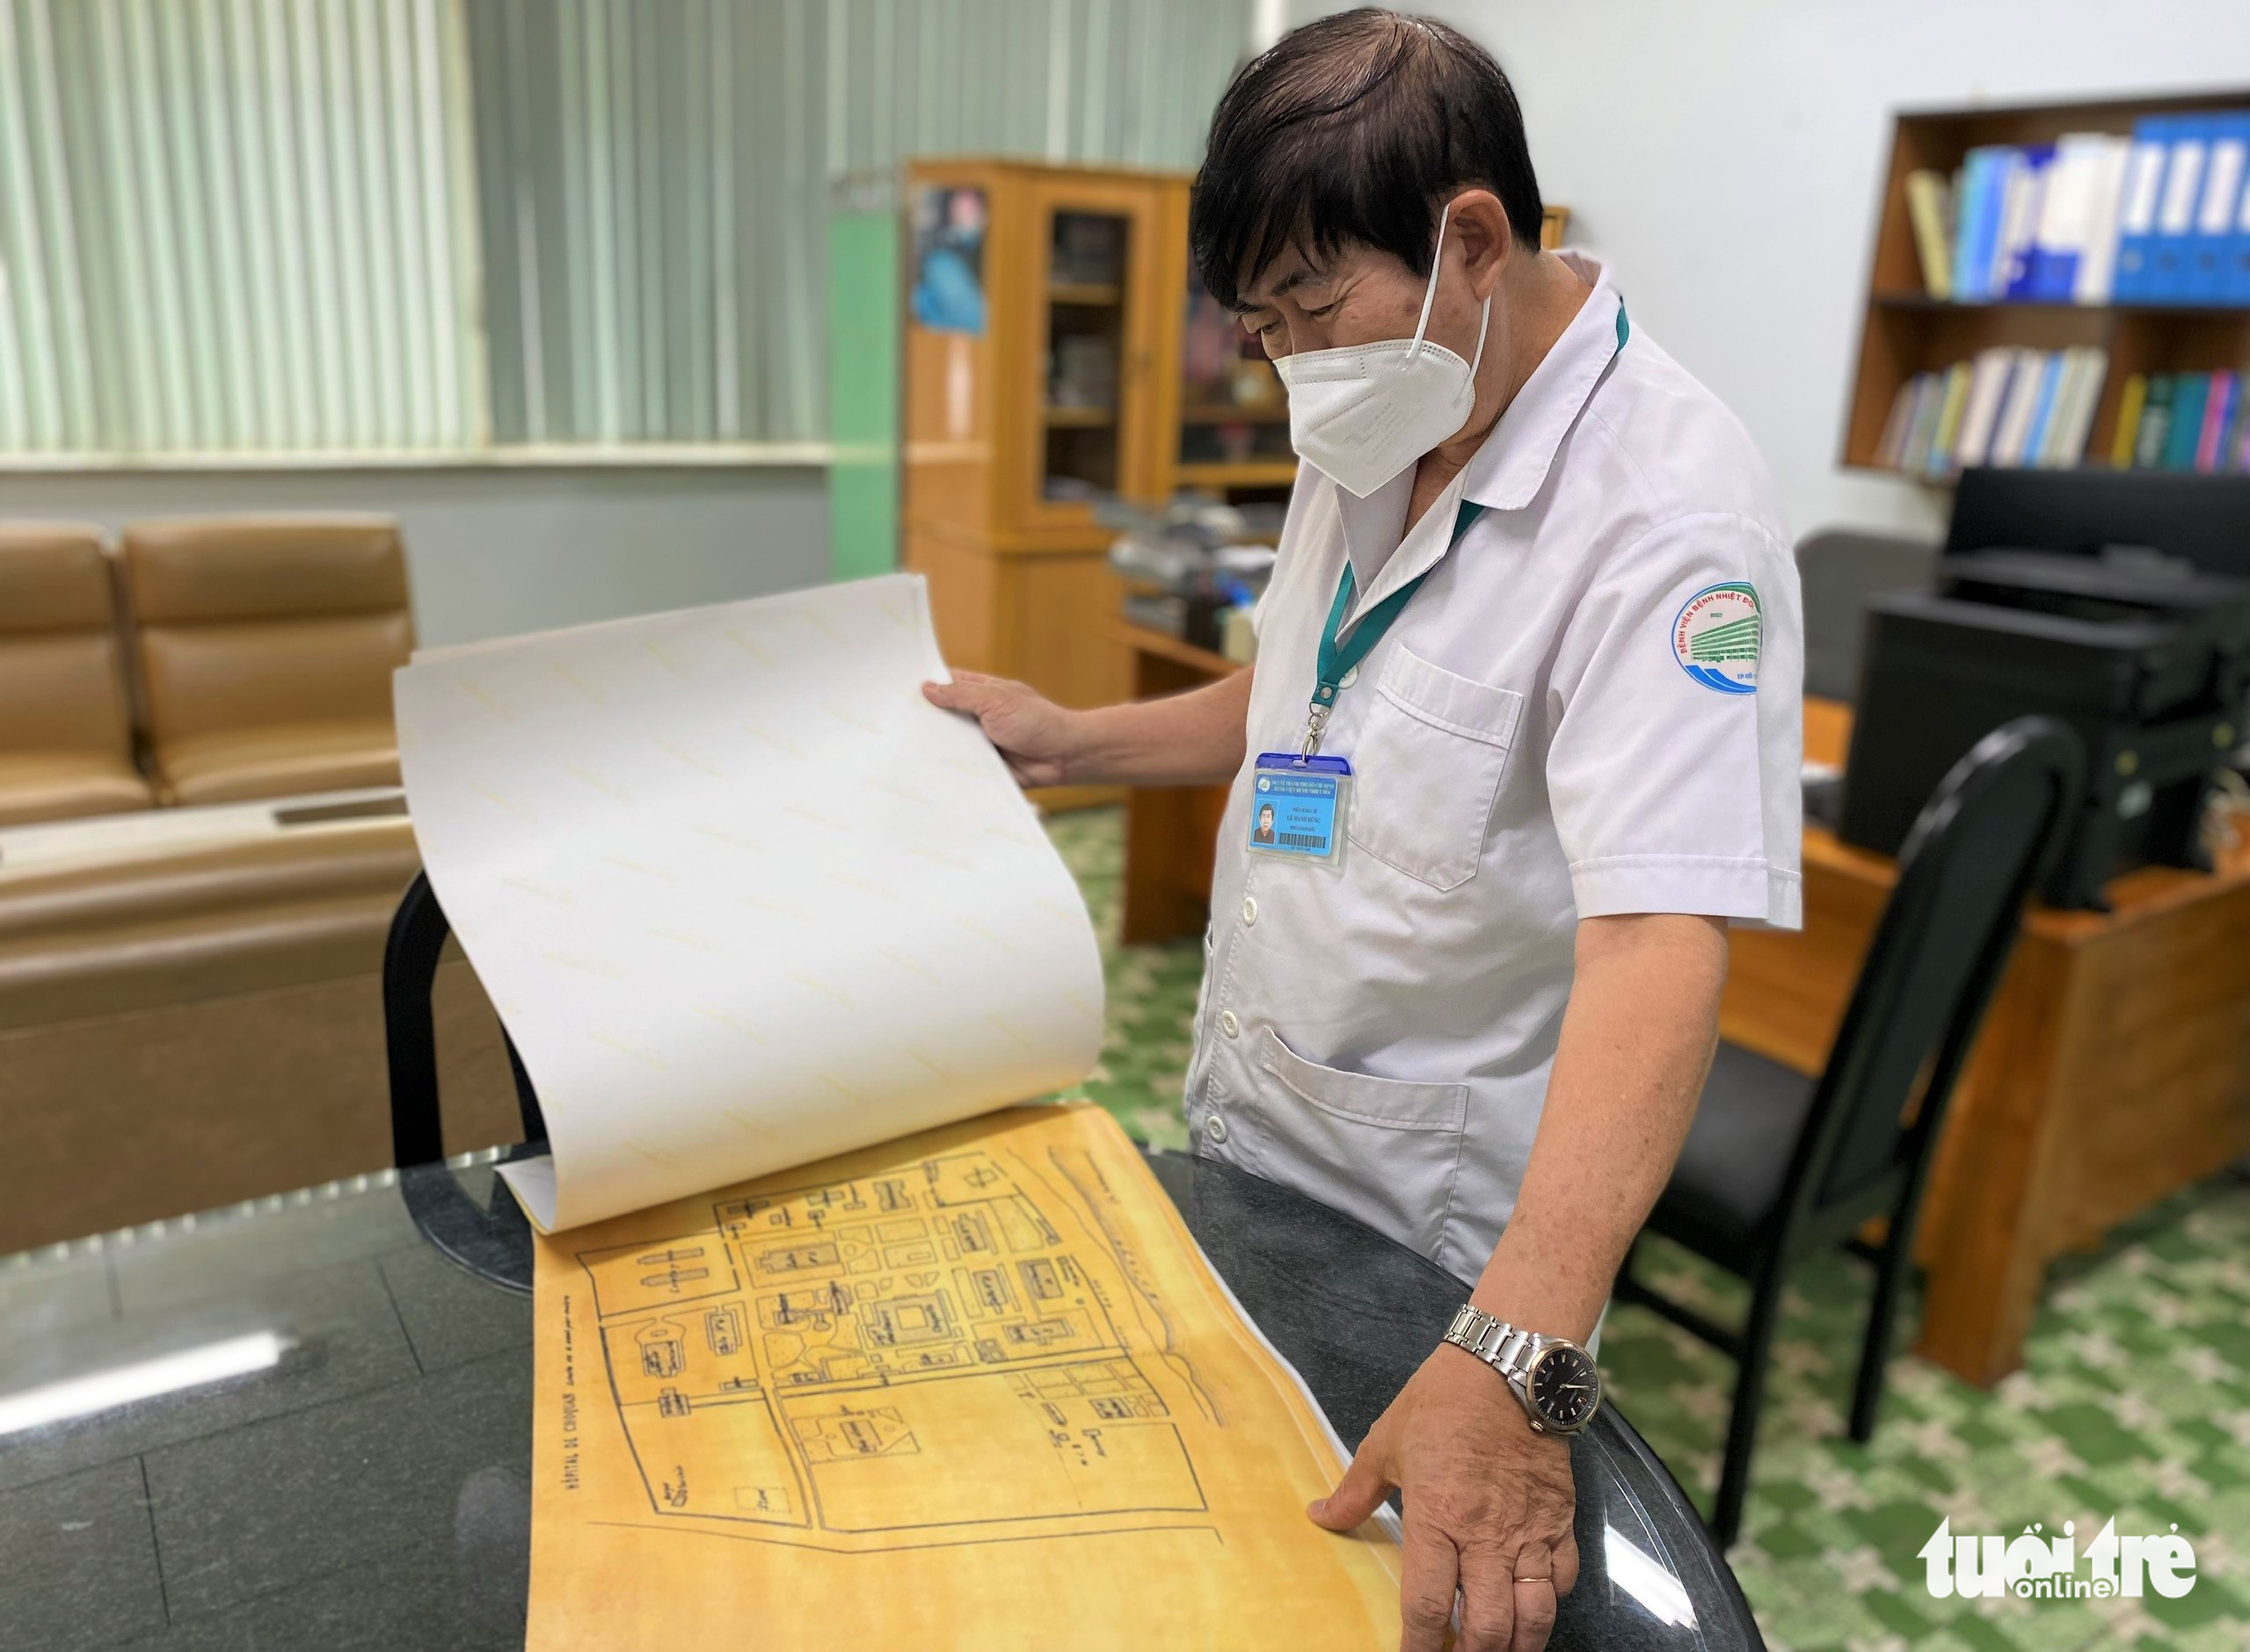 Dr. Le Manh Hung, deputy director of the Ho Chi Minh City Hospital for Tropical Diseases, shows a planning drawing for the construction of new facilities. Photo: Duyen Phan / Tuoi Tre